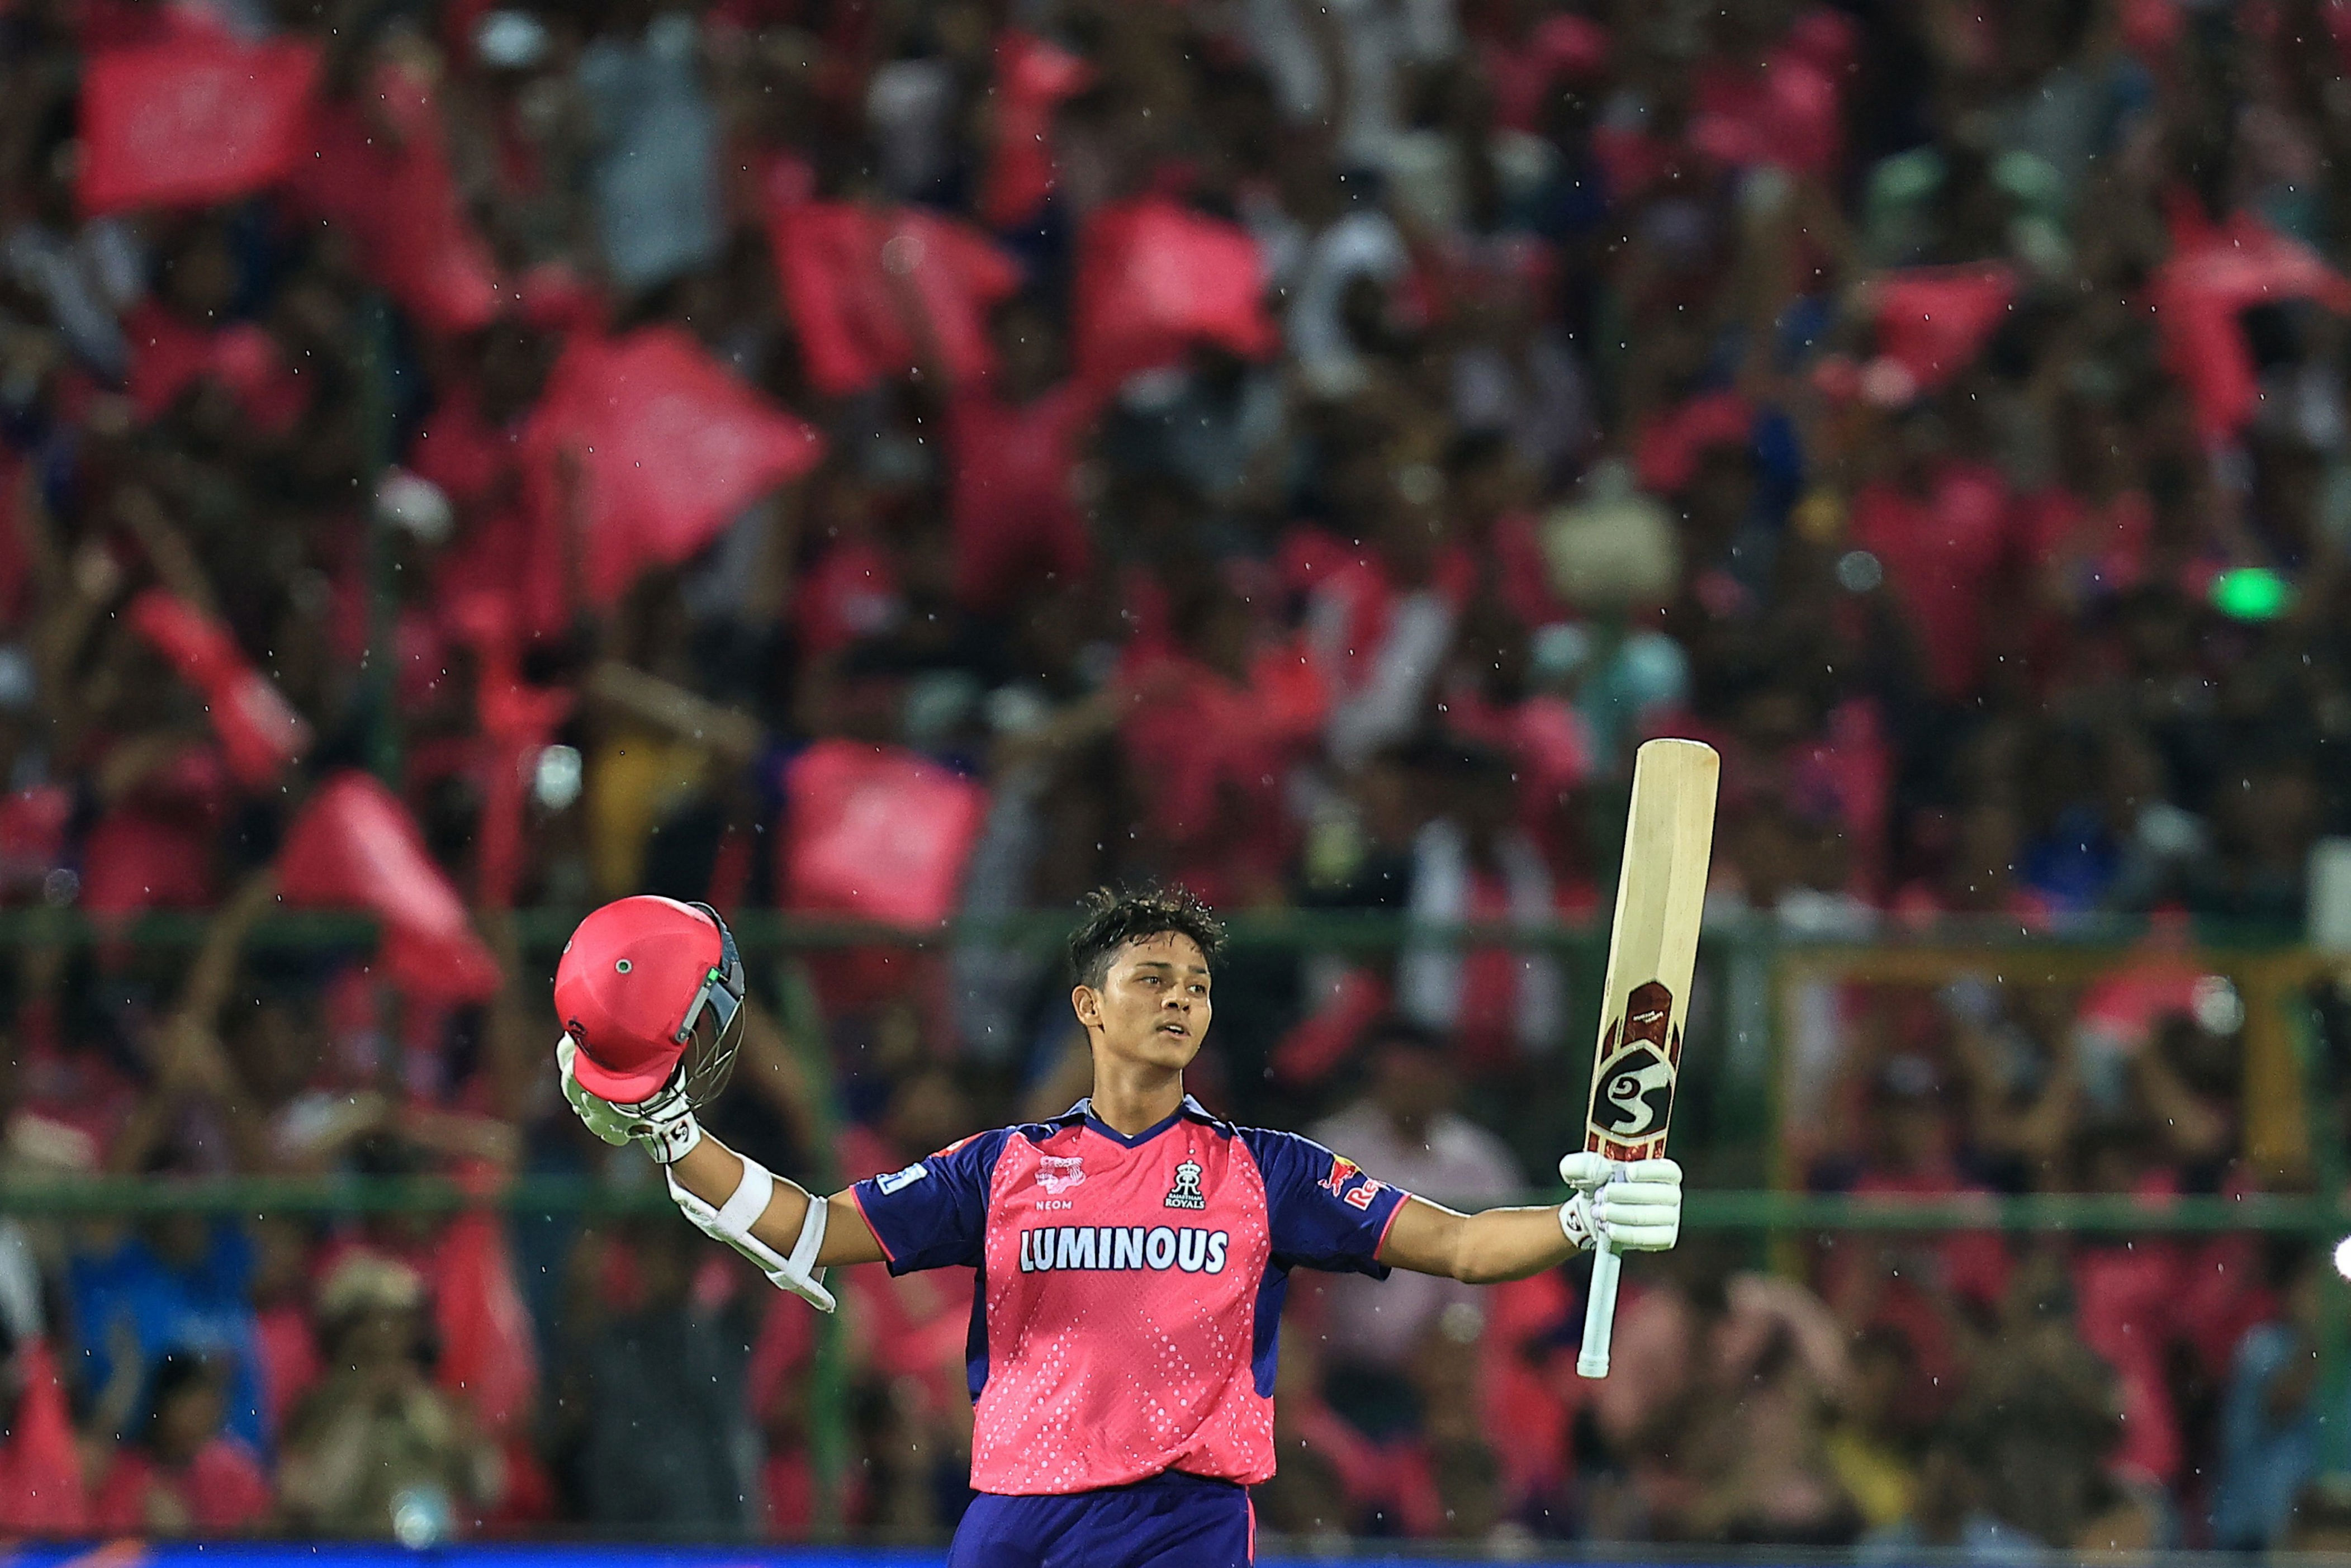 jaiswal batted with maturity against mi, played cricketing shots: lara